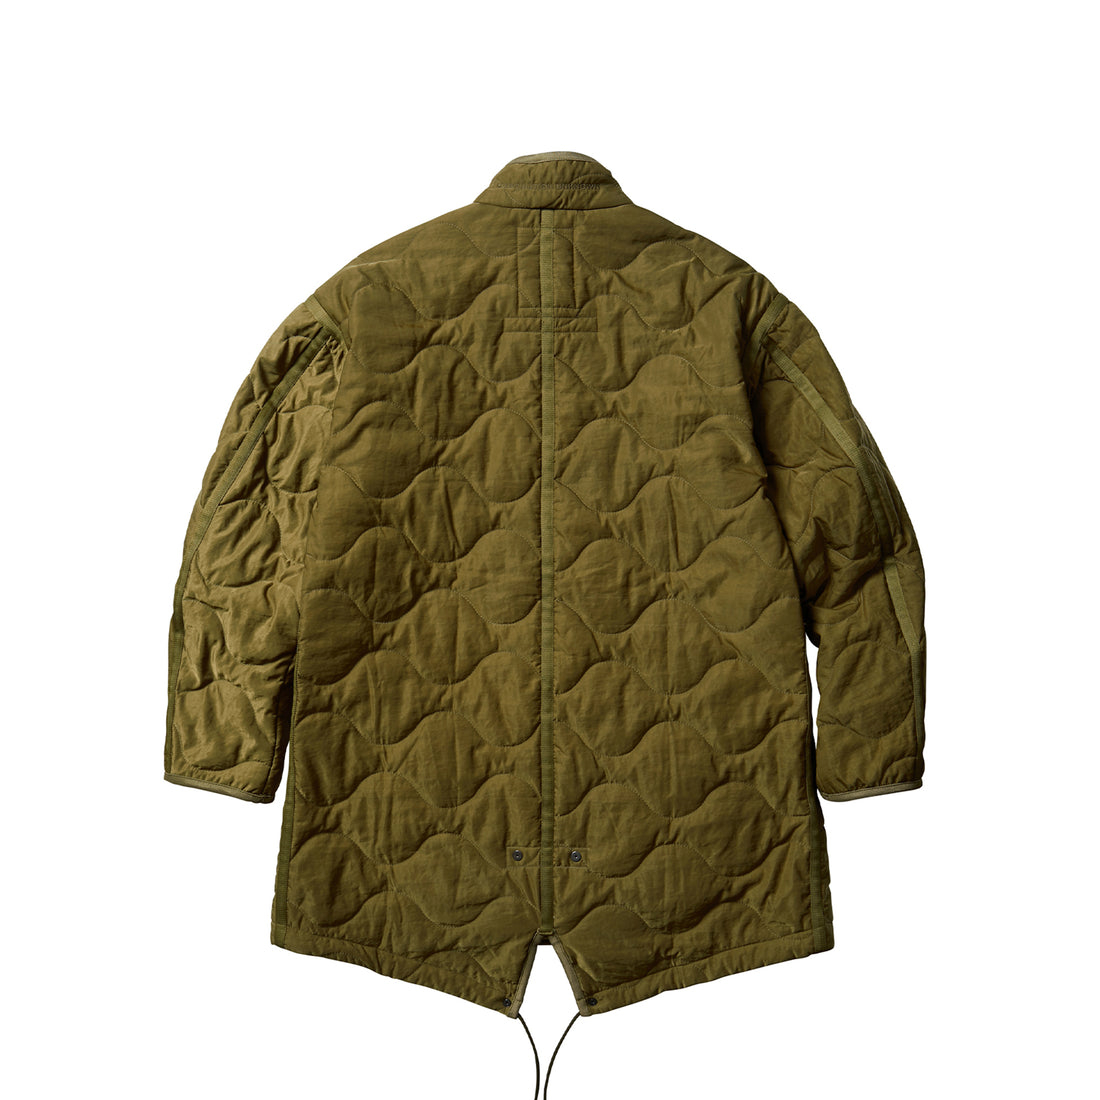 LIBERAIDERS - QUILTED FISHTAIL COAT - OLIVE